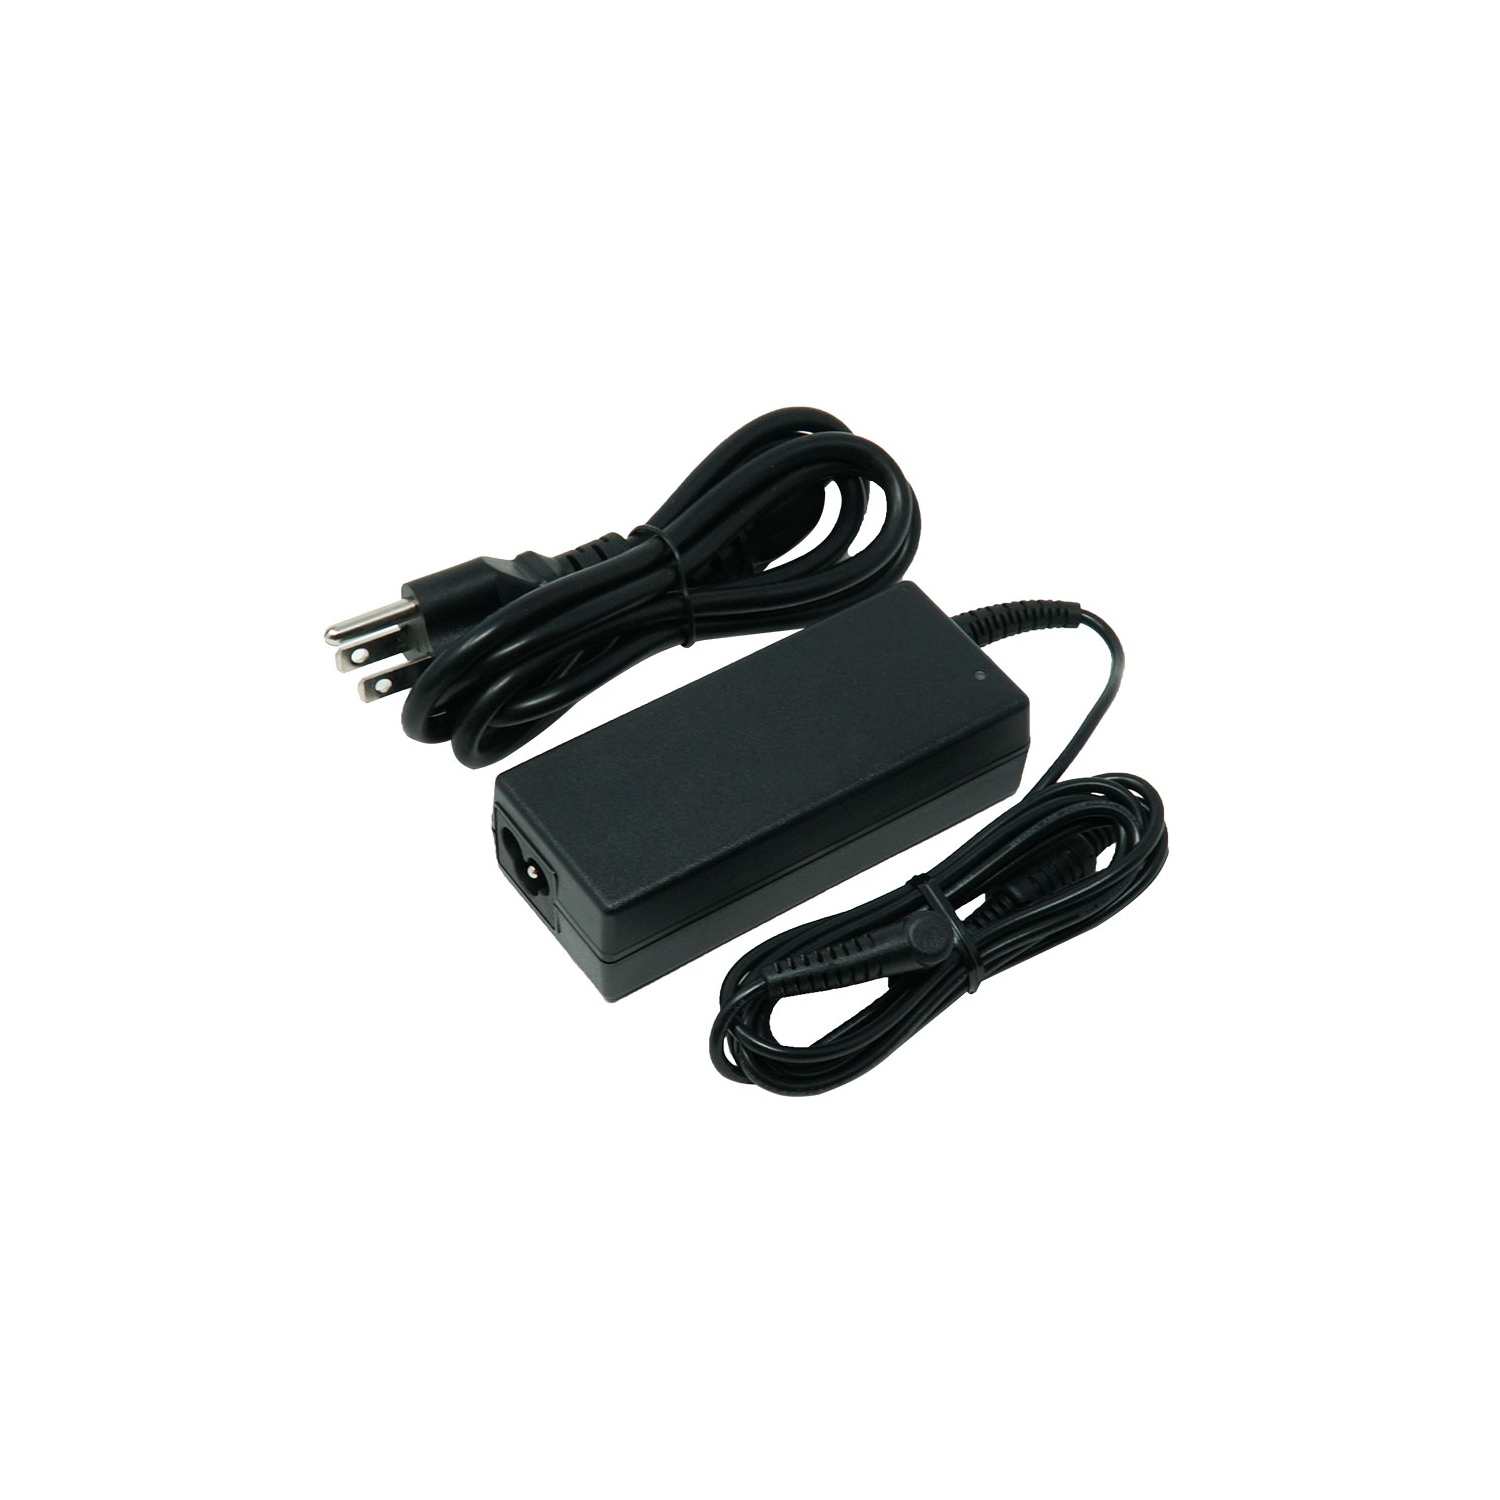 Dr. Battery - Notebook Adapter for Fujitsu LifeBook LH532 / 105927 / 105928 / 106293 / 106294 / 106295 - Free Shipping